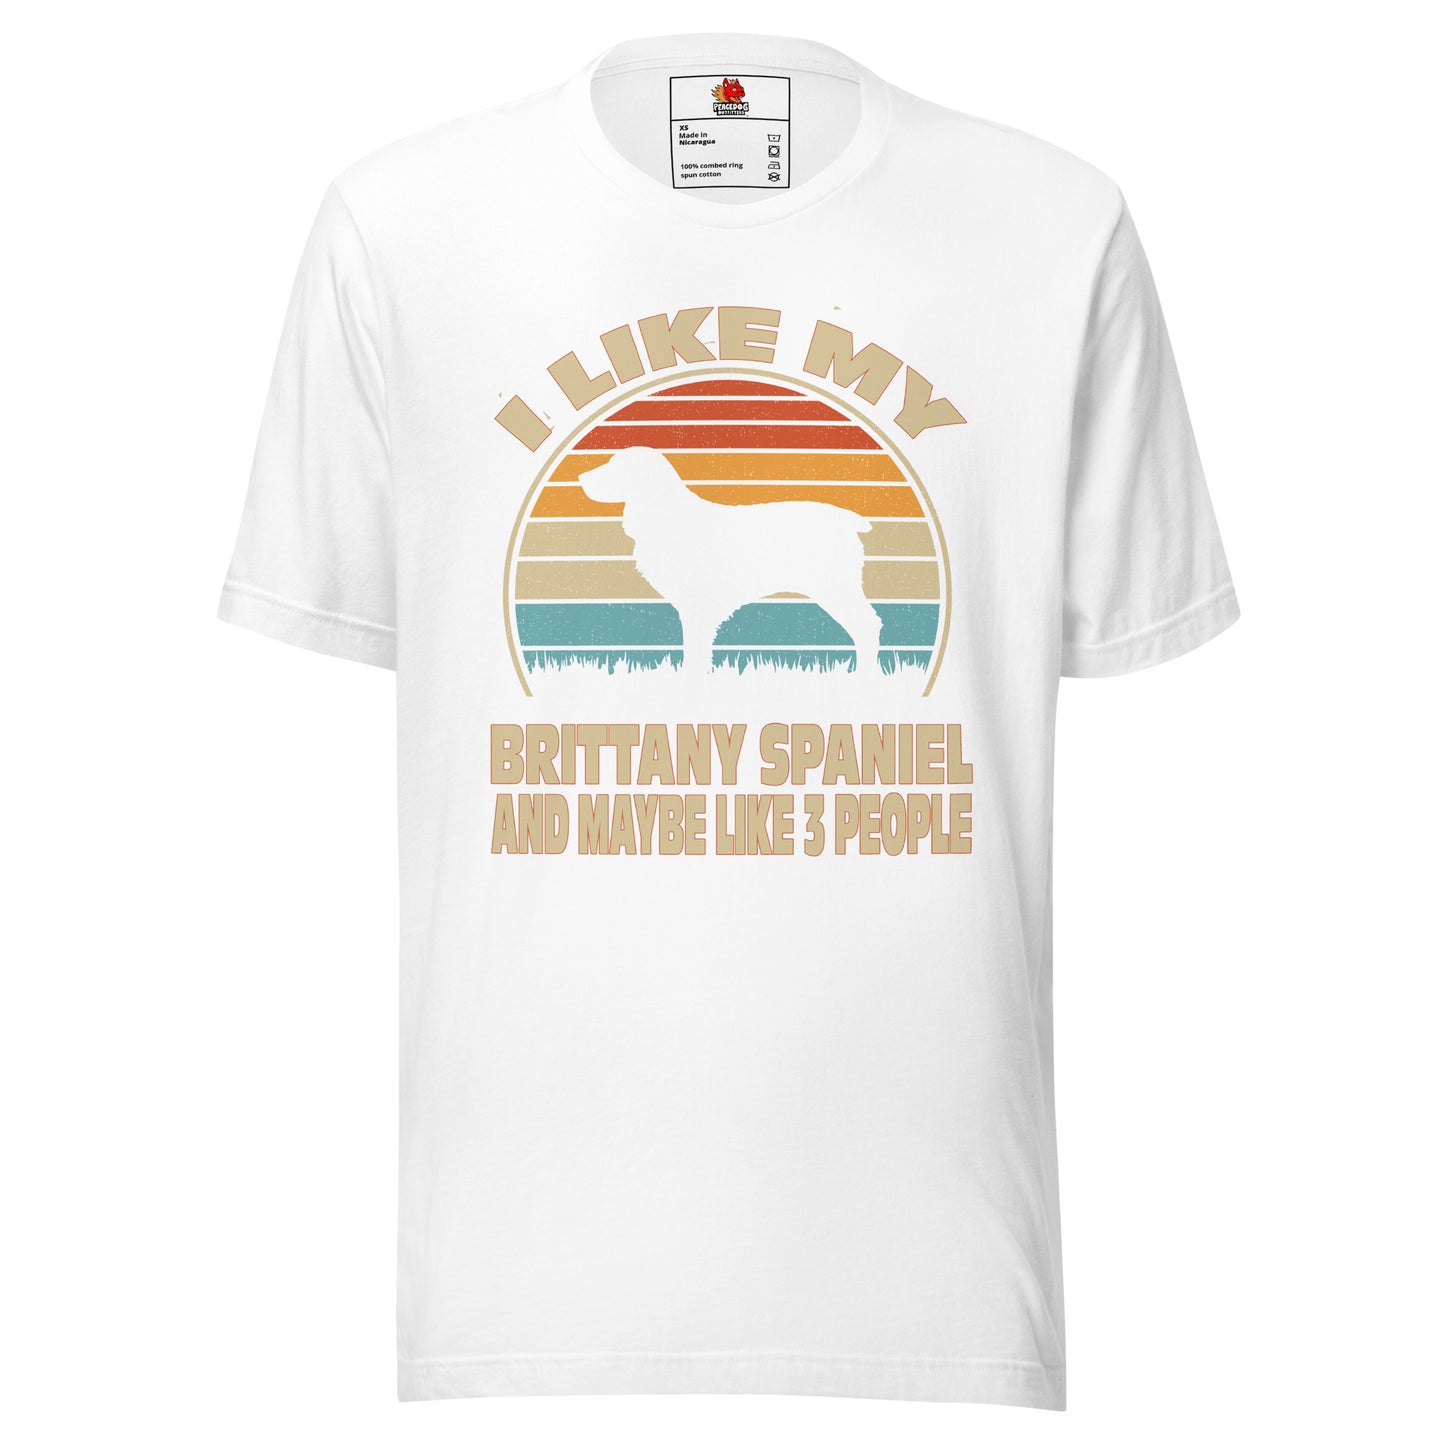 I Like My Brittany and Maybe Like 3 People T-shirt